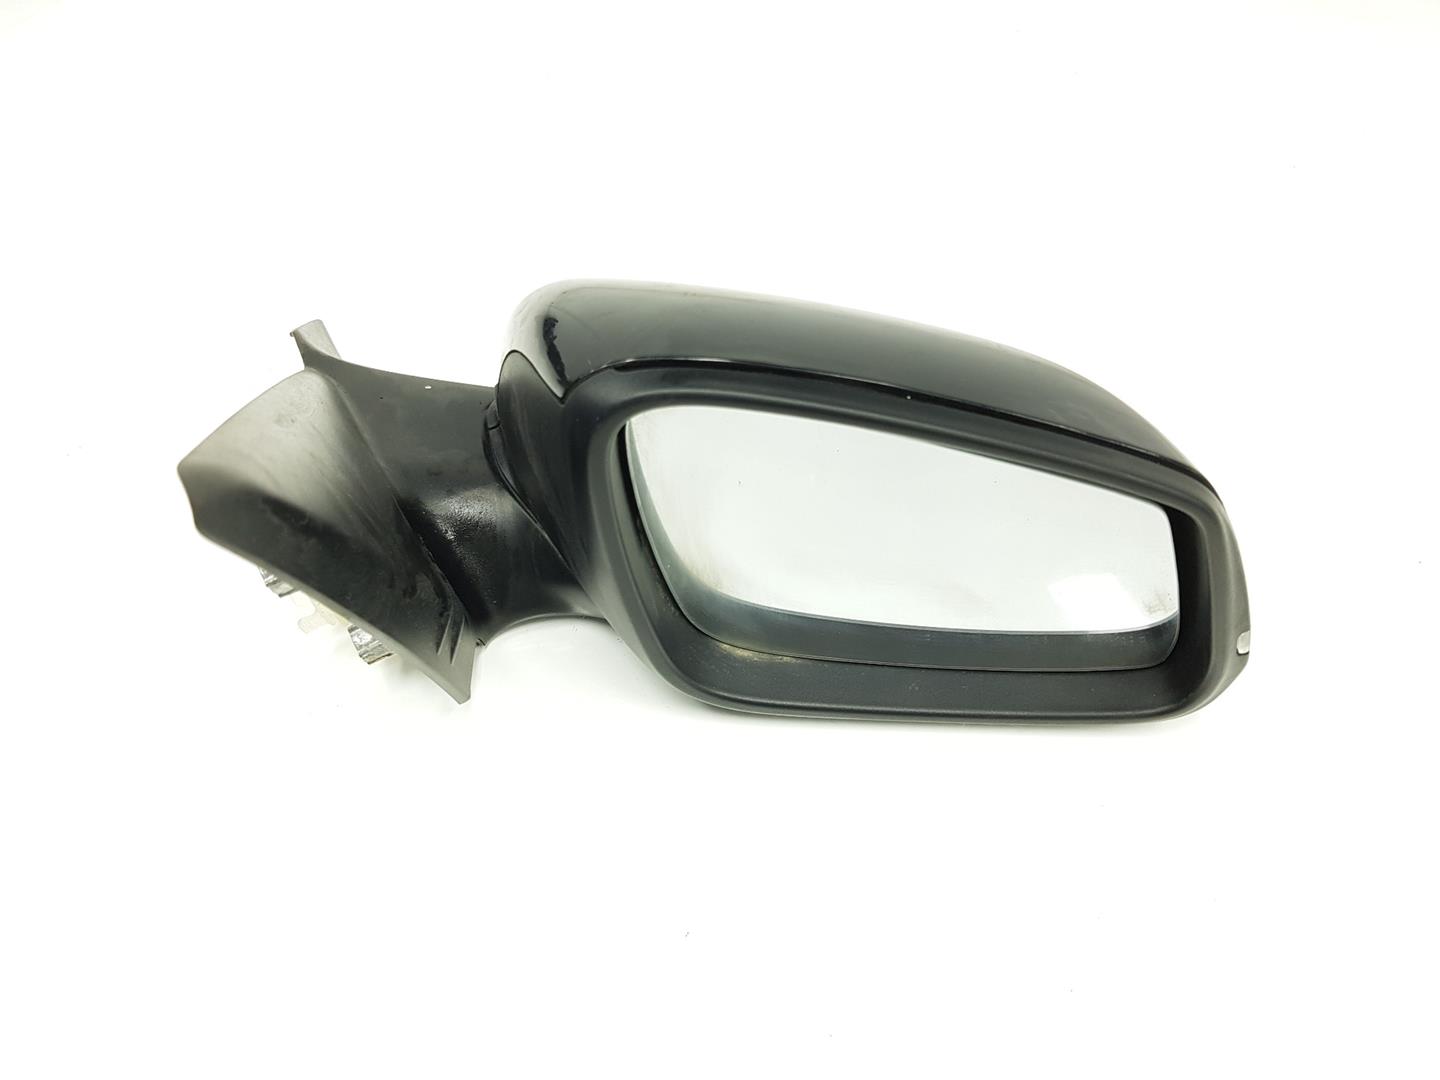 BMW 1 Series F20/F21 (2011-2020) Right Side Wing Mirror 7242702, 7242702, COLORNEGRO668 24823986